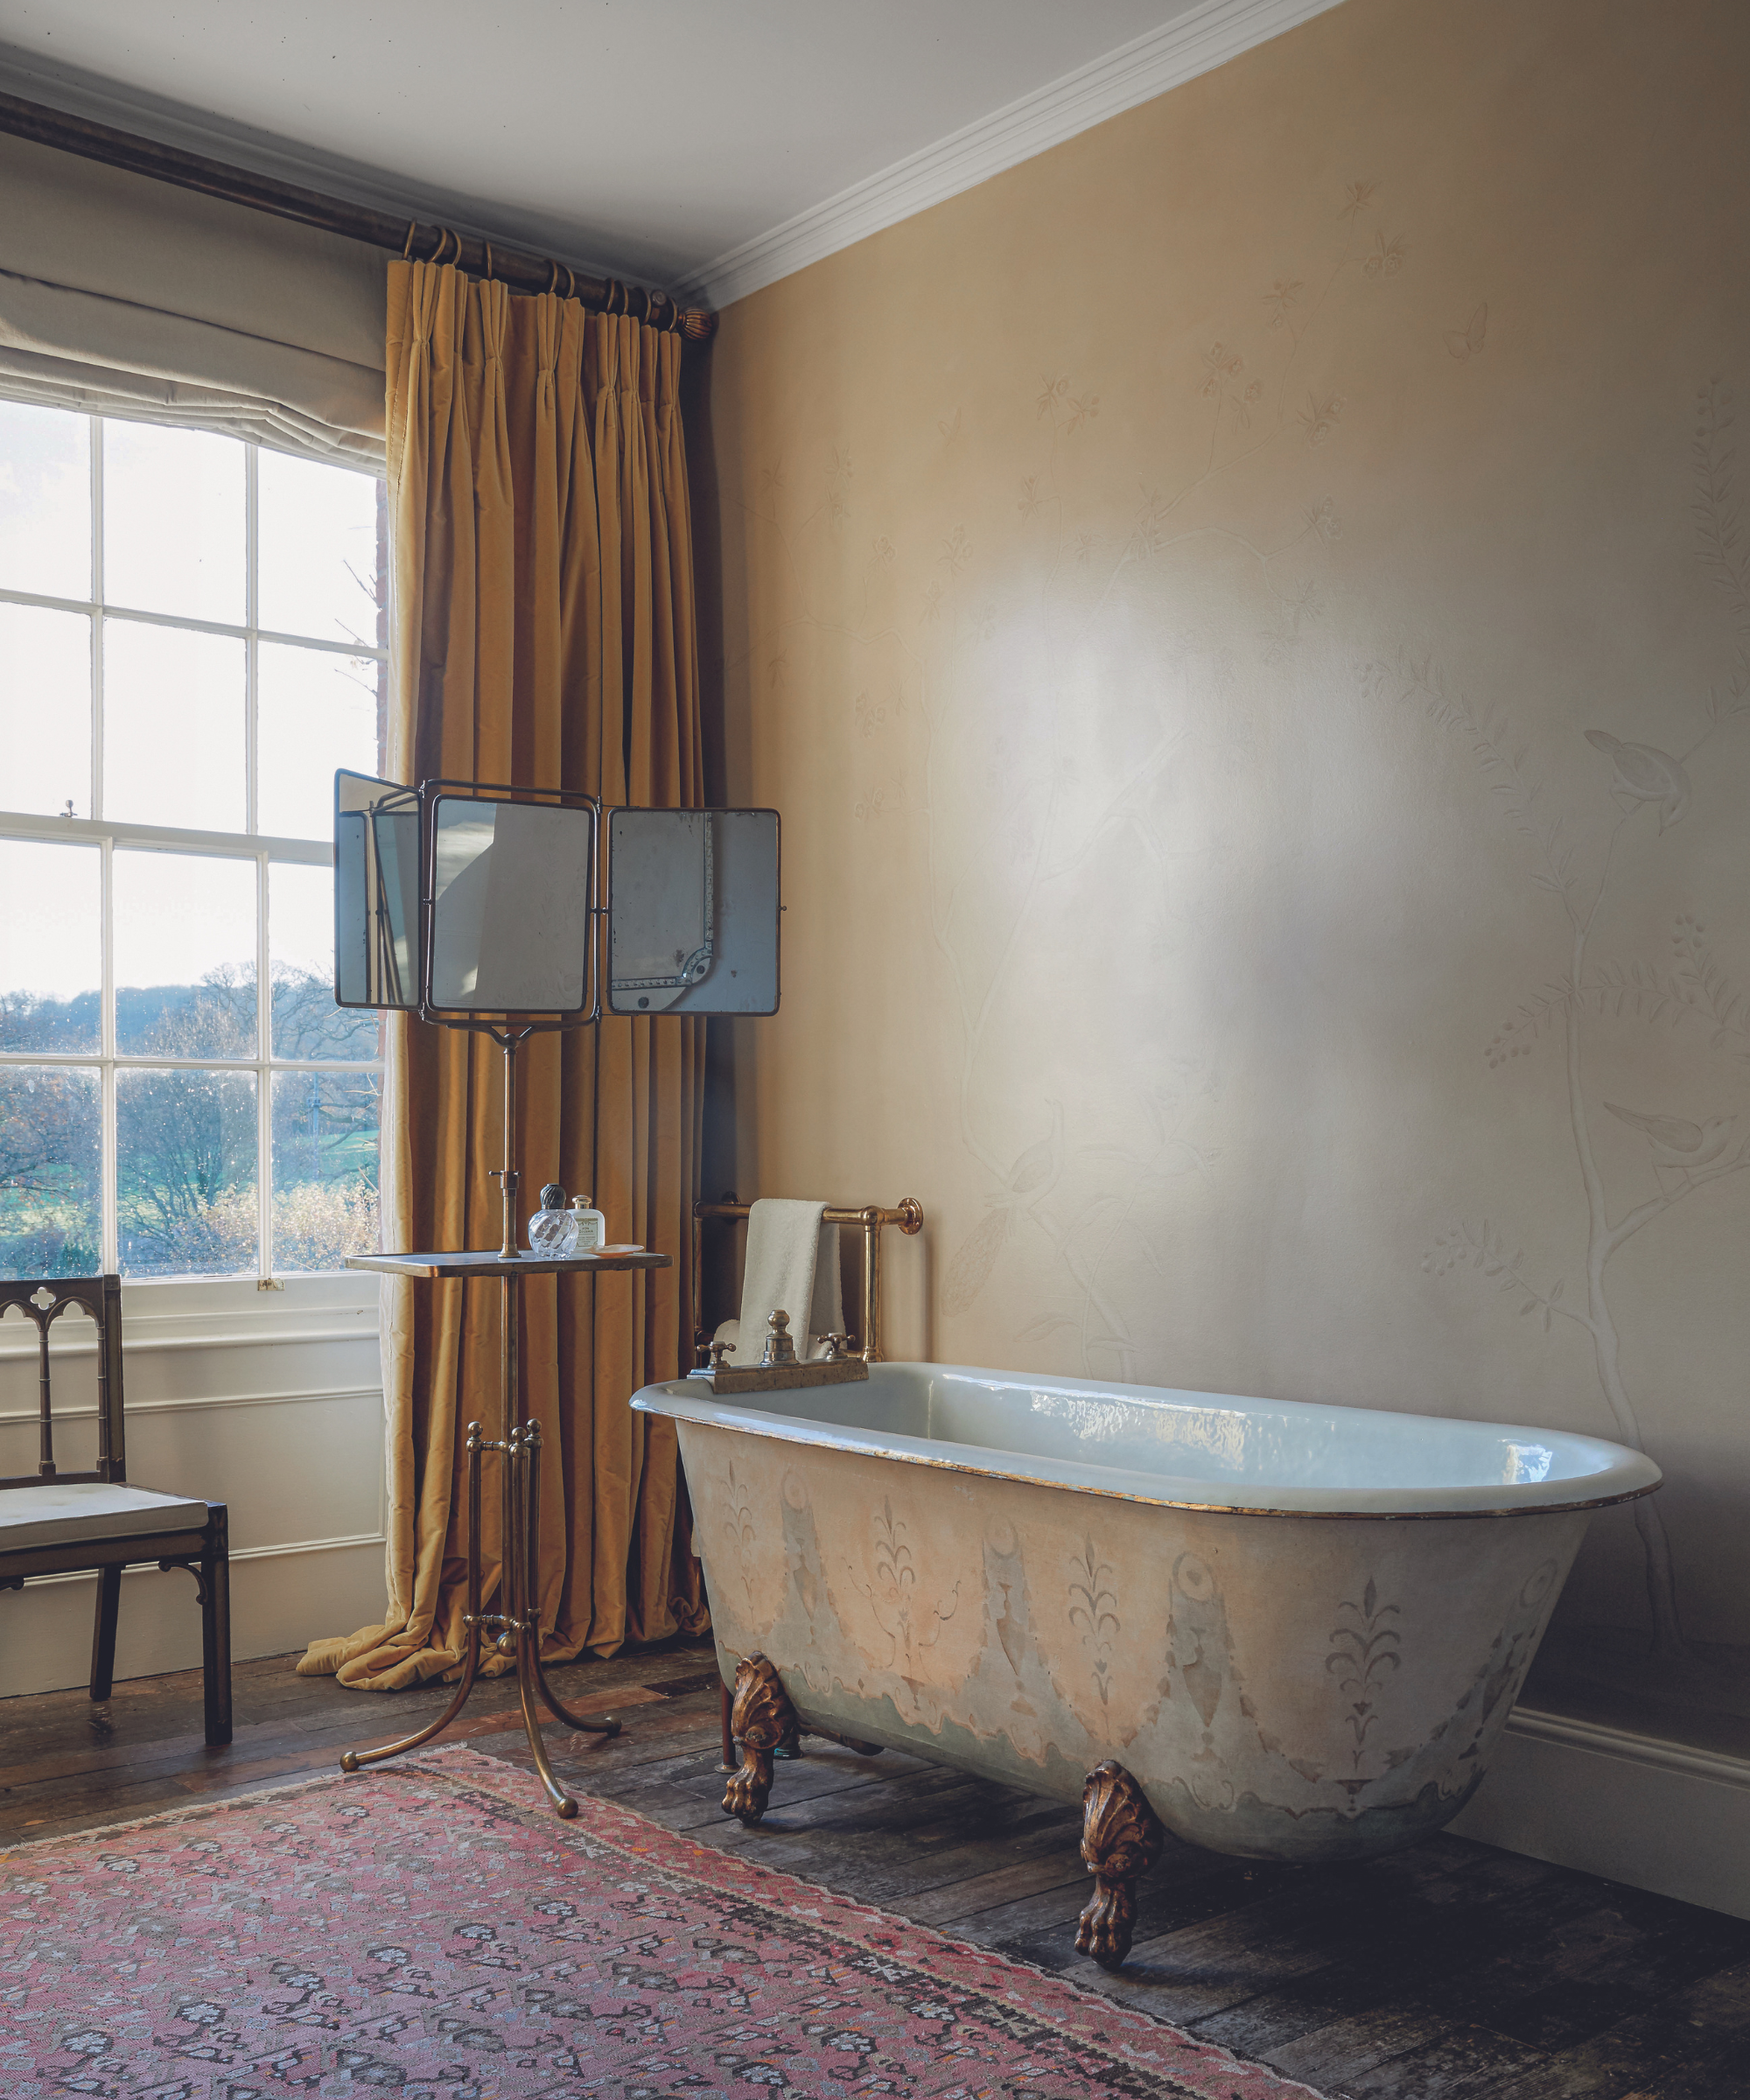 antique bath in victorian style bathroom with draping curtains and rug and gold walls and patterned bath